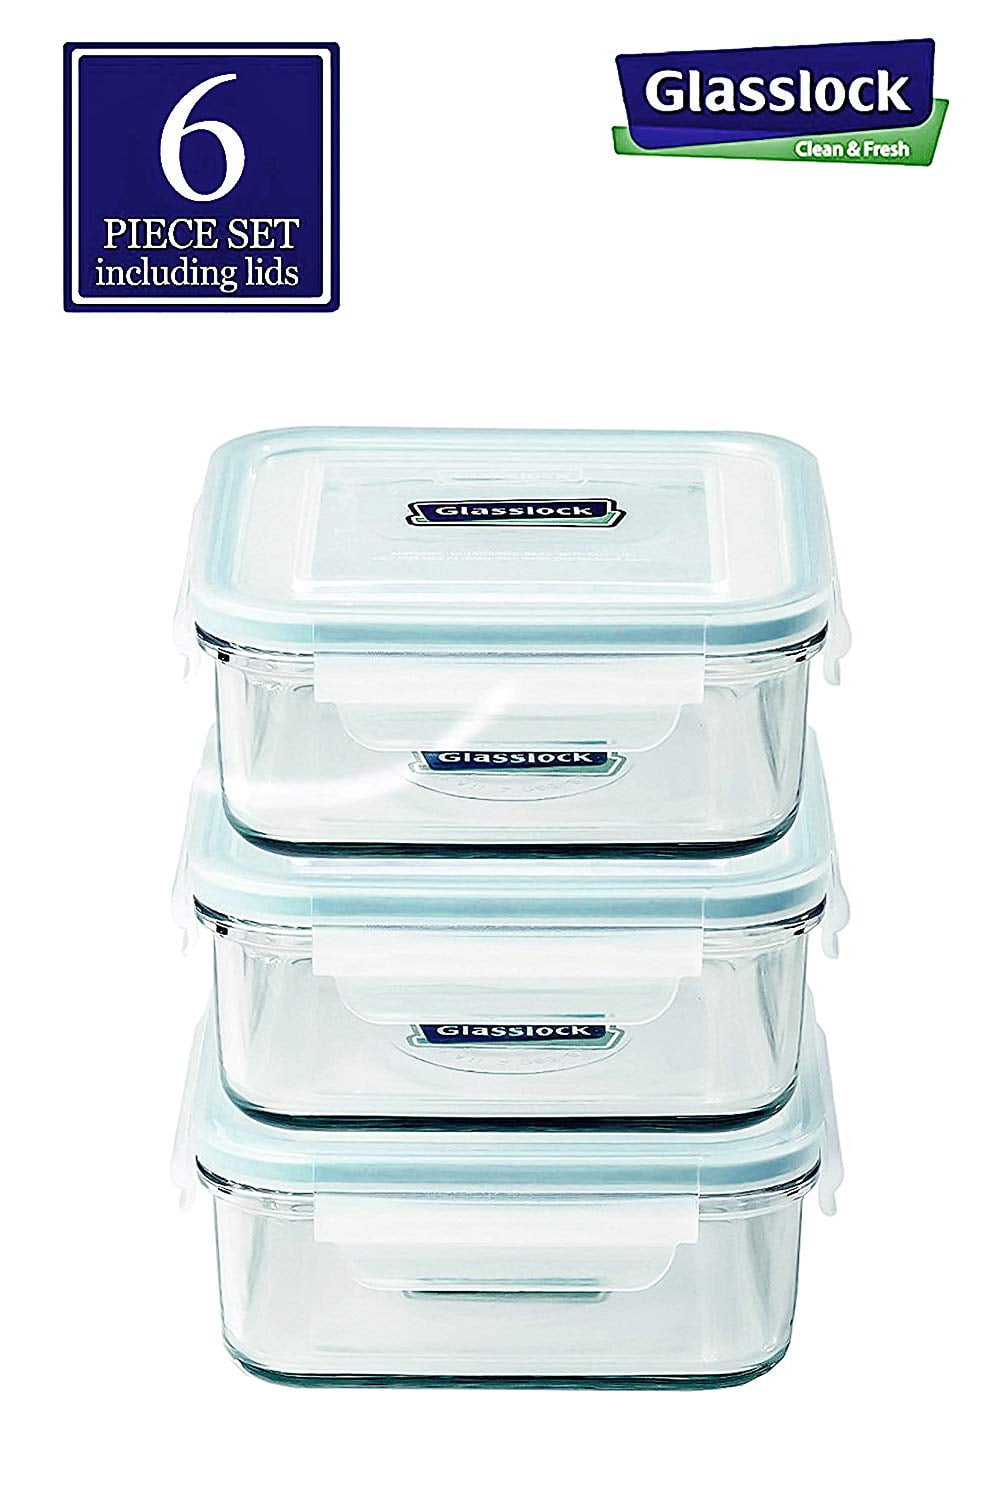 Glasslock Square Tempered Glass Food Container Set of 3 490ml/17oz